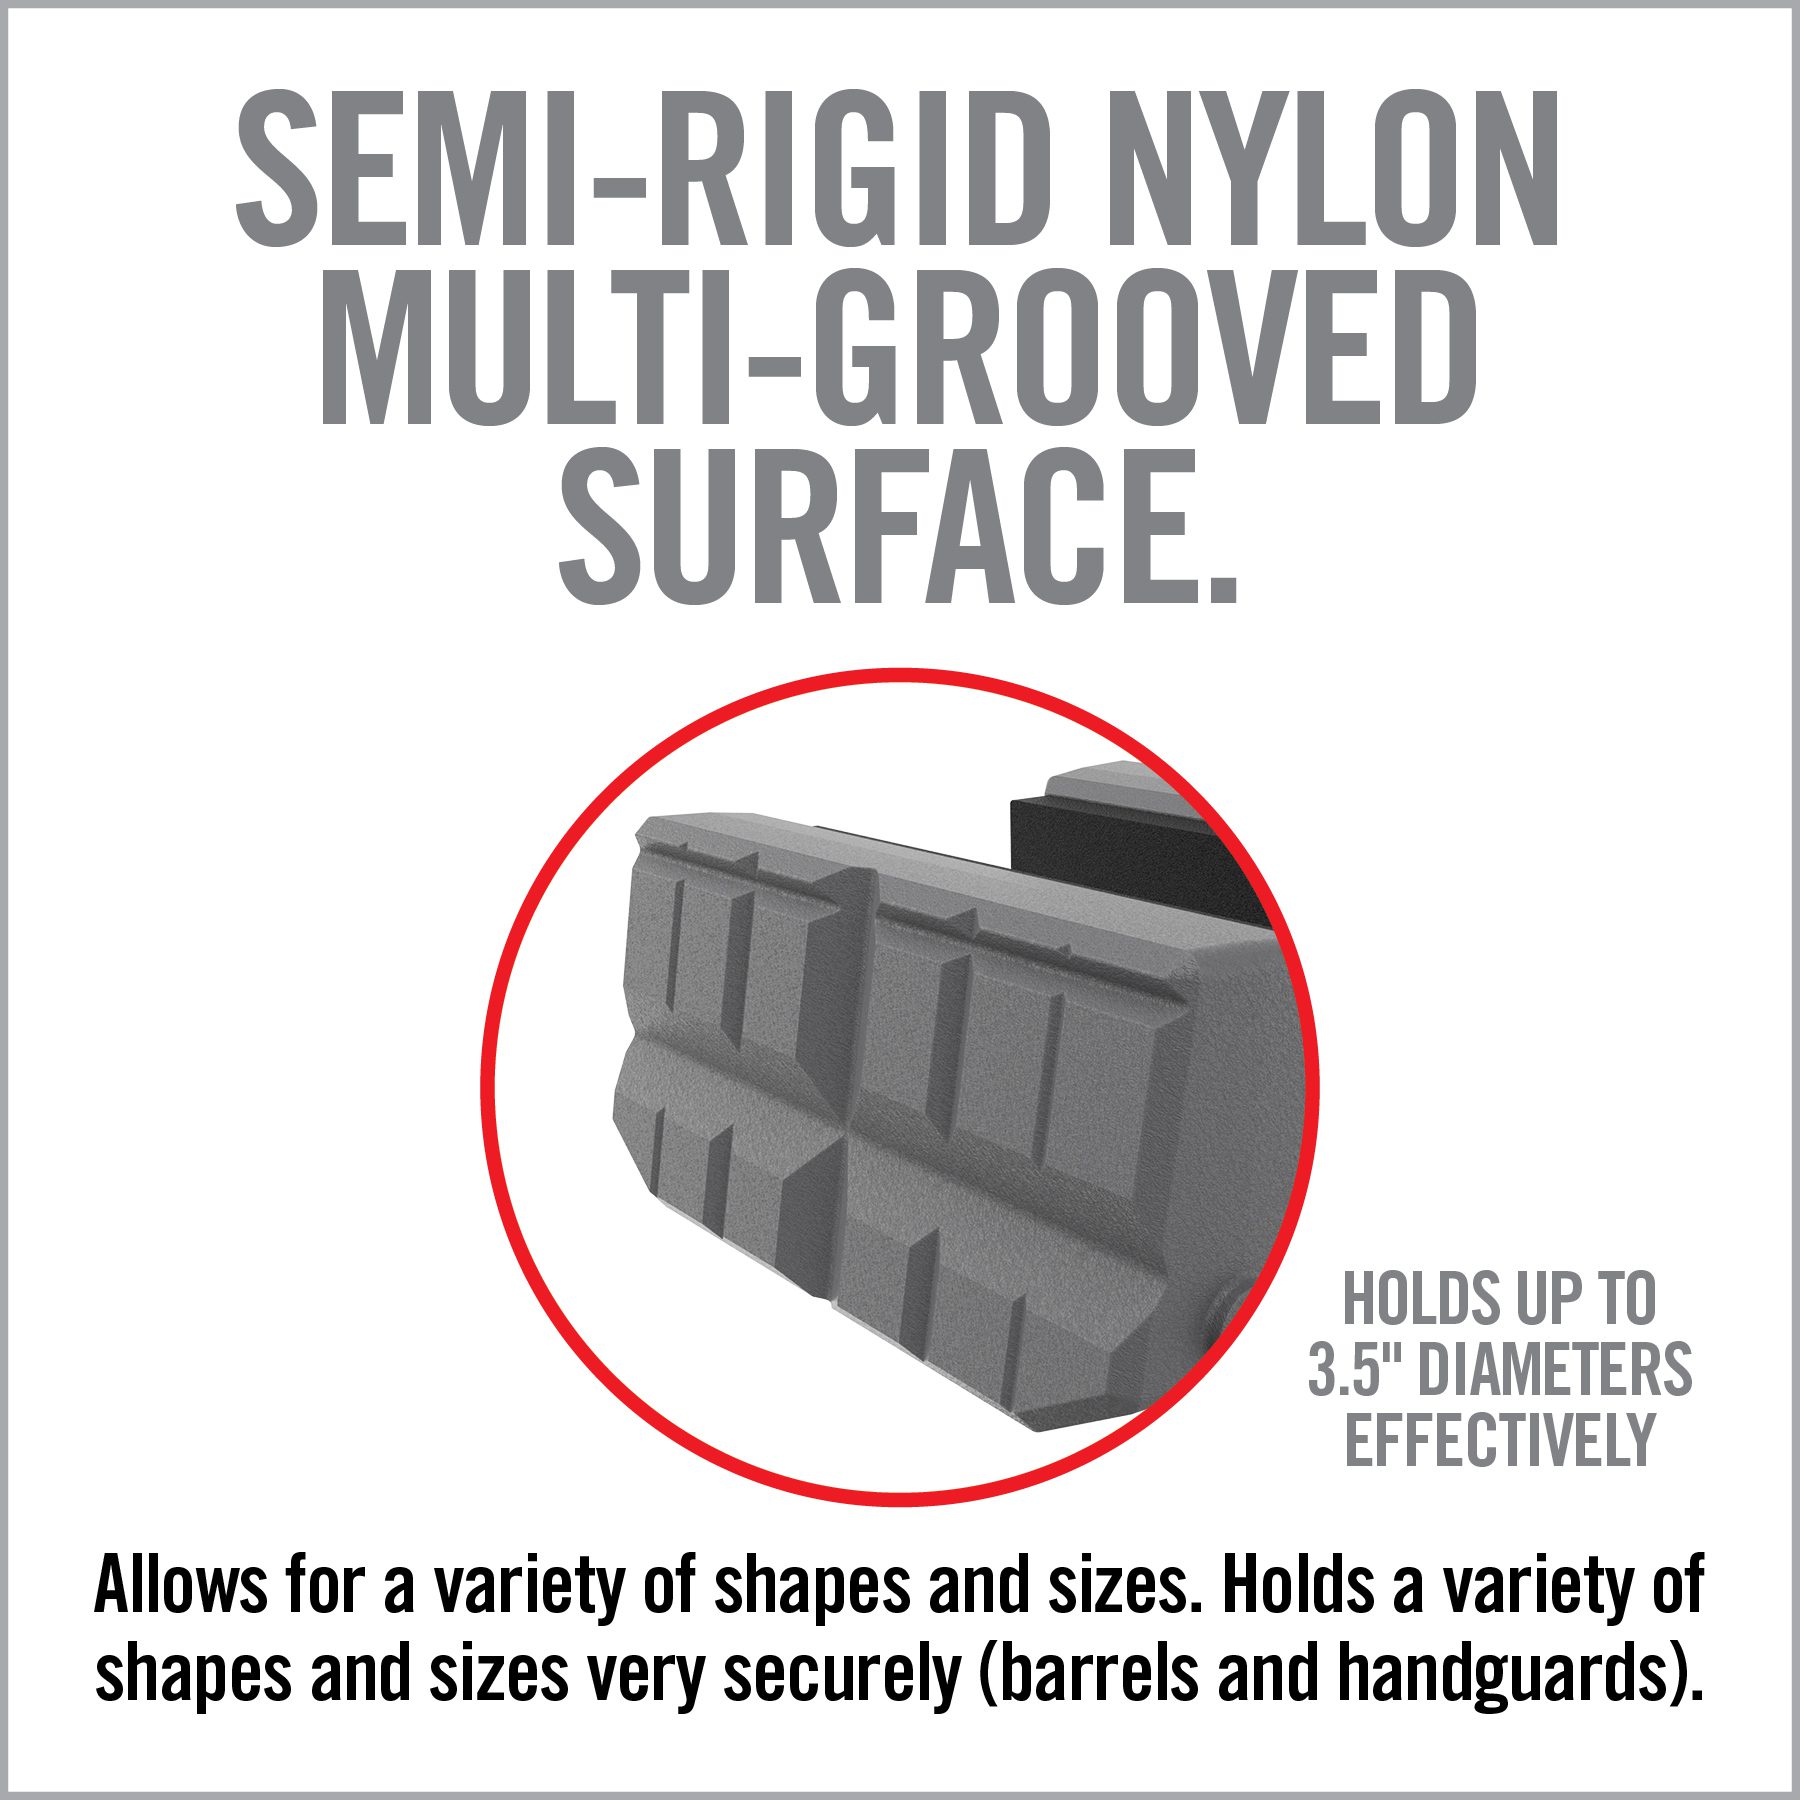 an ad for semi - rigid nylon multi - grooved surface